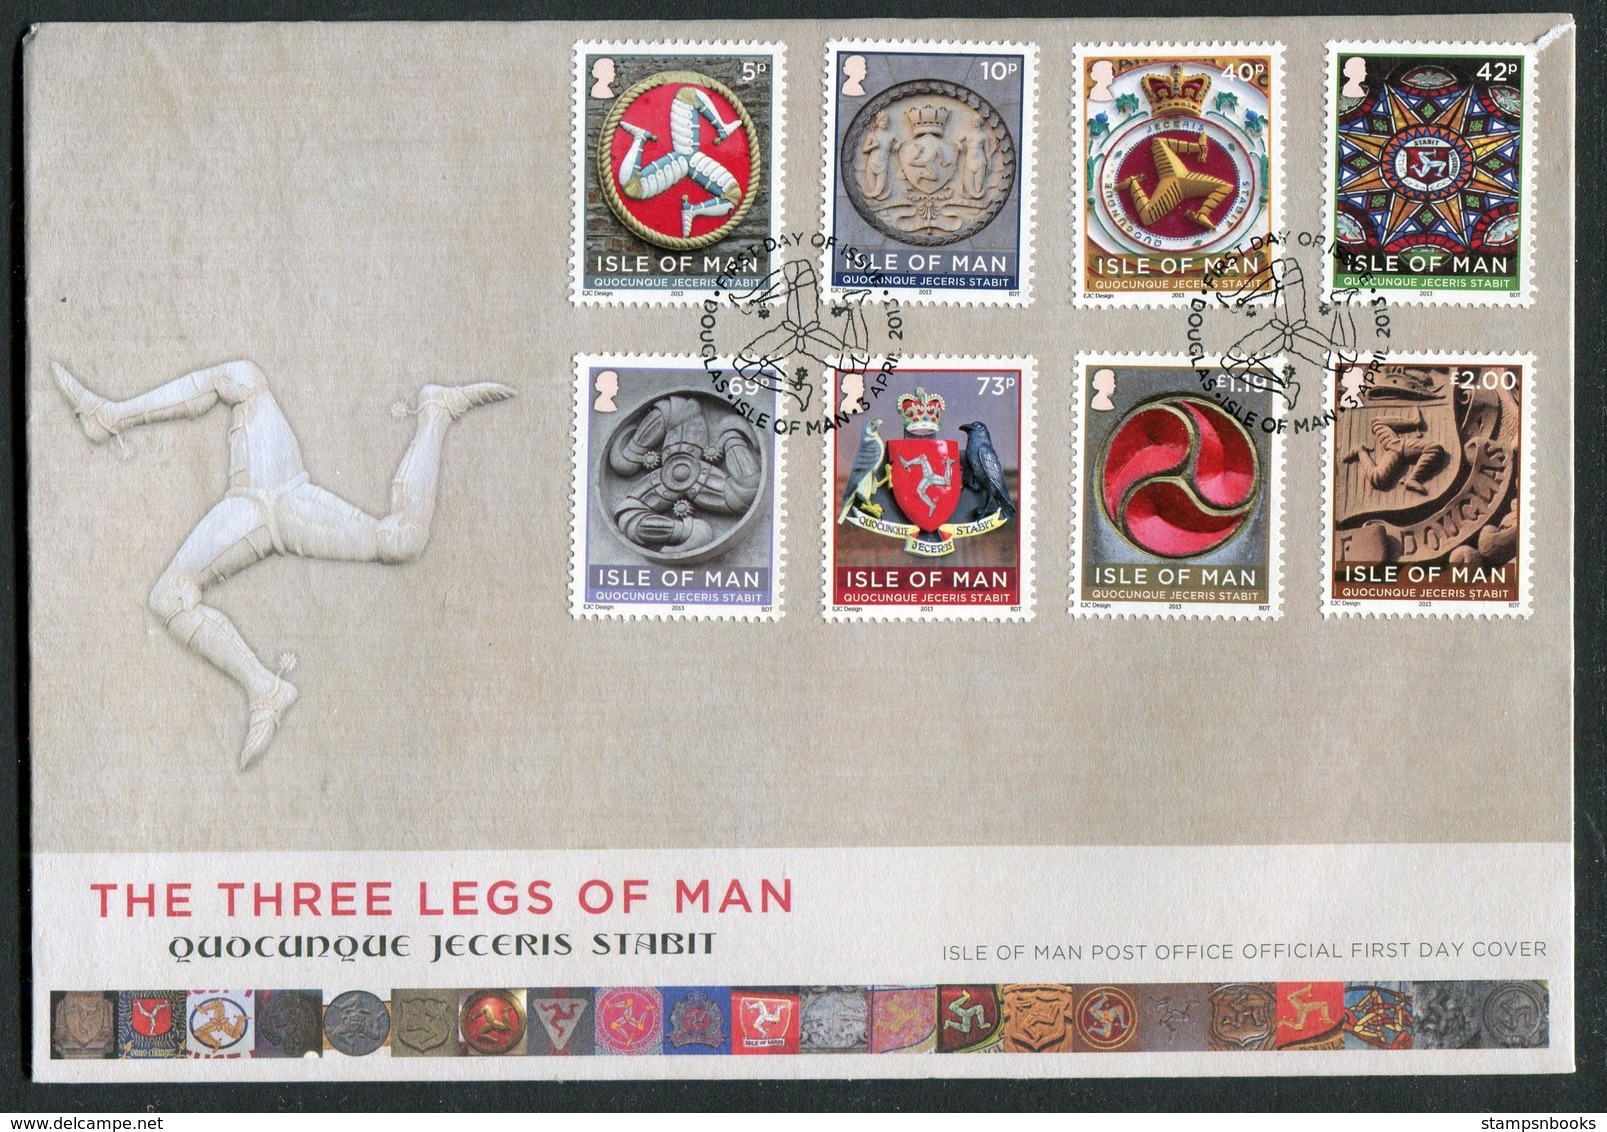 2013 Isle Of Man FDC / I.O.M. First Day Cover. The Three Legs Of Man - Isle Of Man